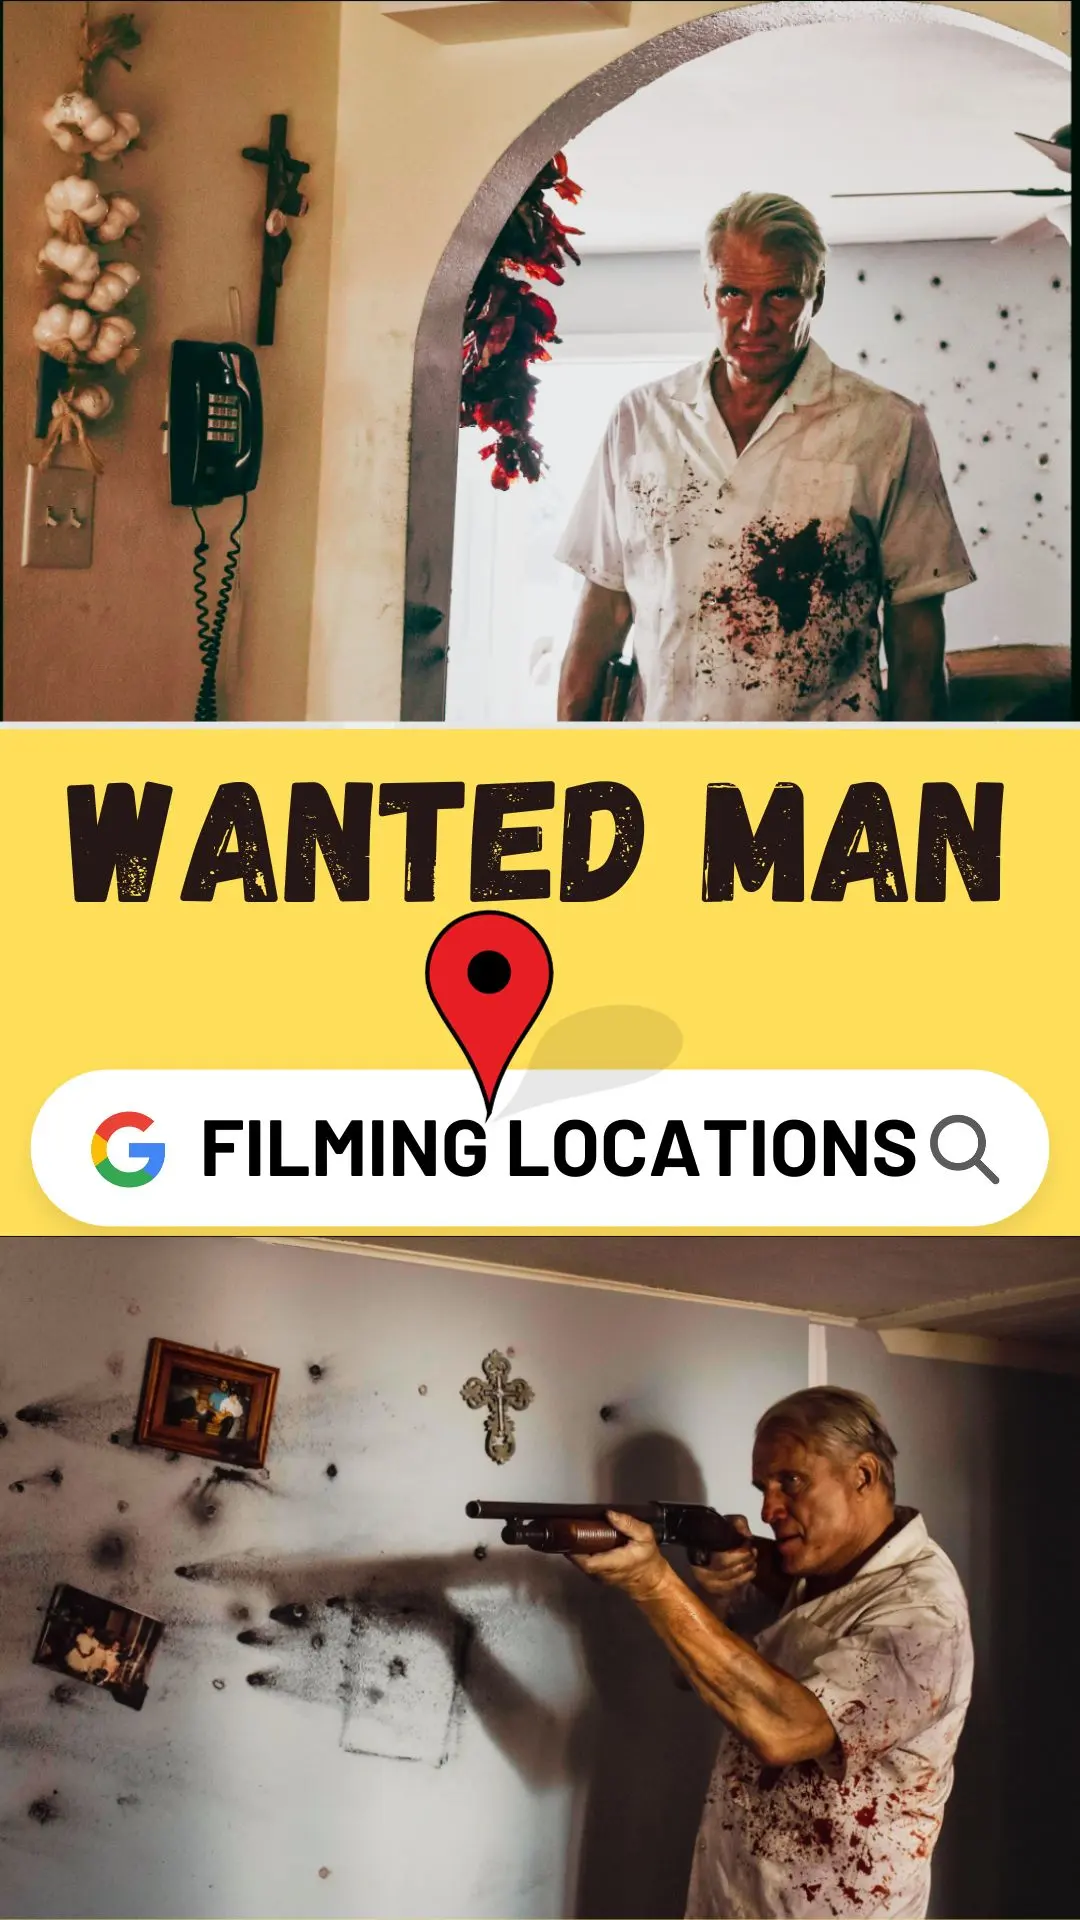 Wanted Man Filming Locations